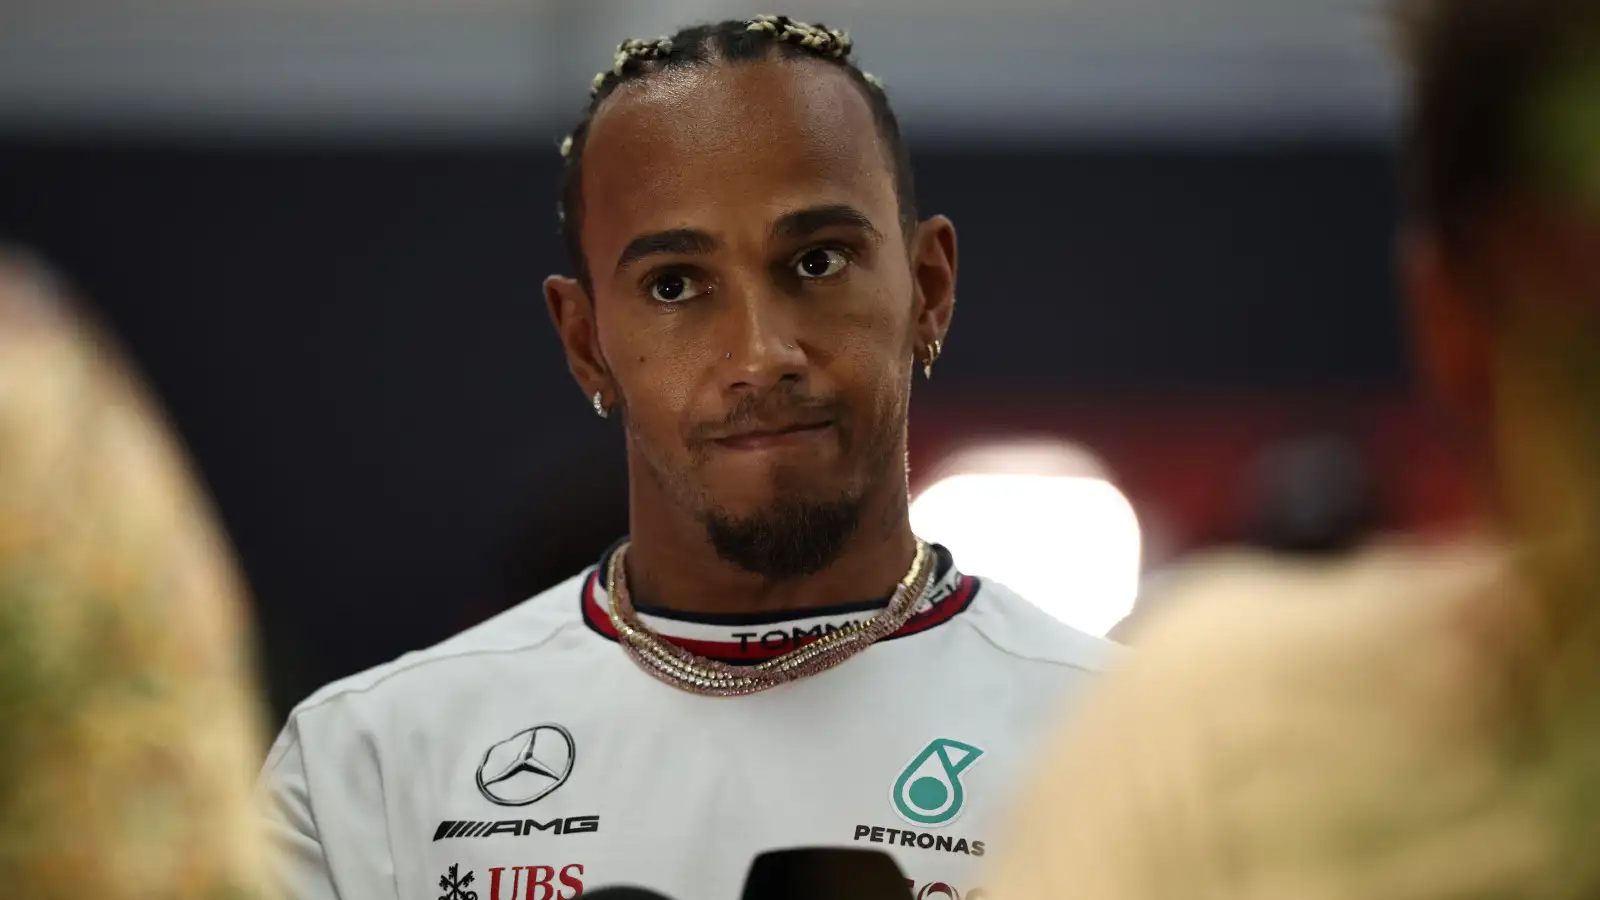 Mercedes' Lewis Hamilton speaks to the press during the Singapore Grand Prix weekend.